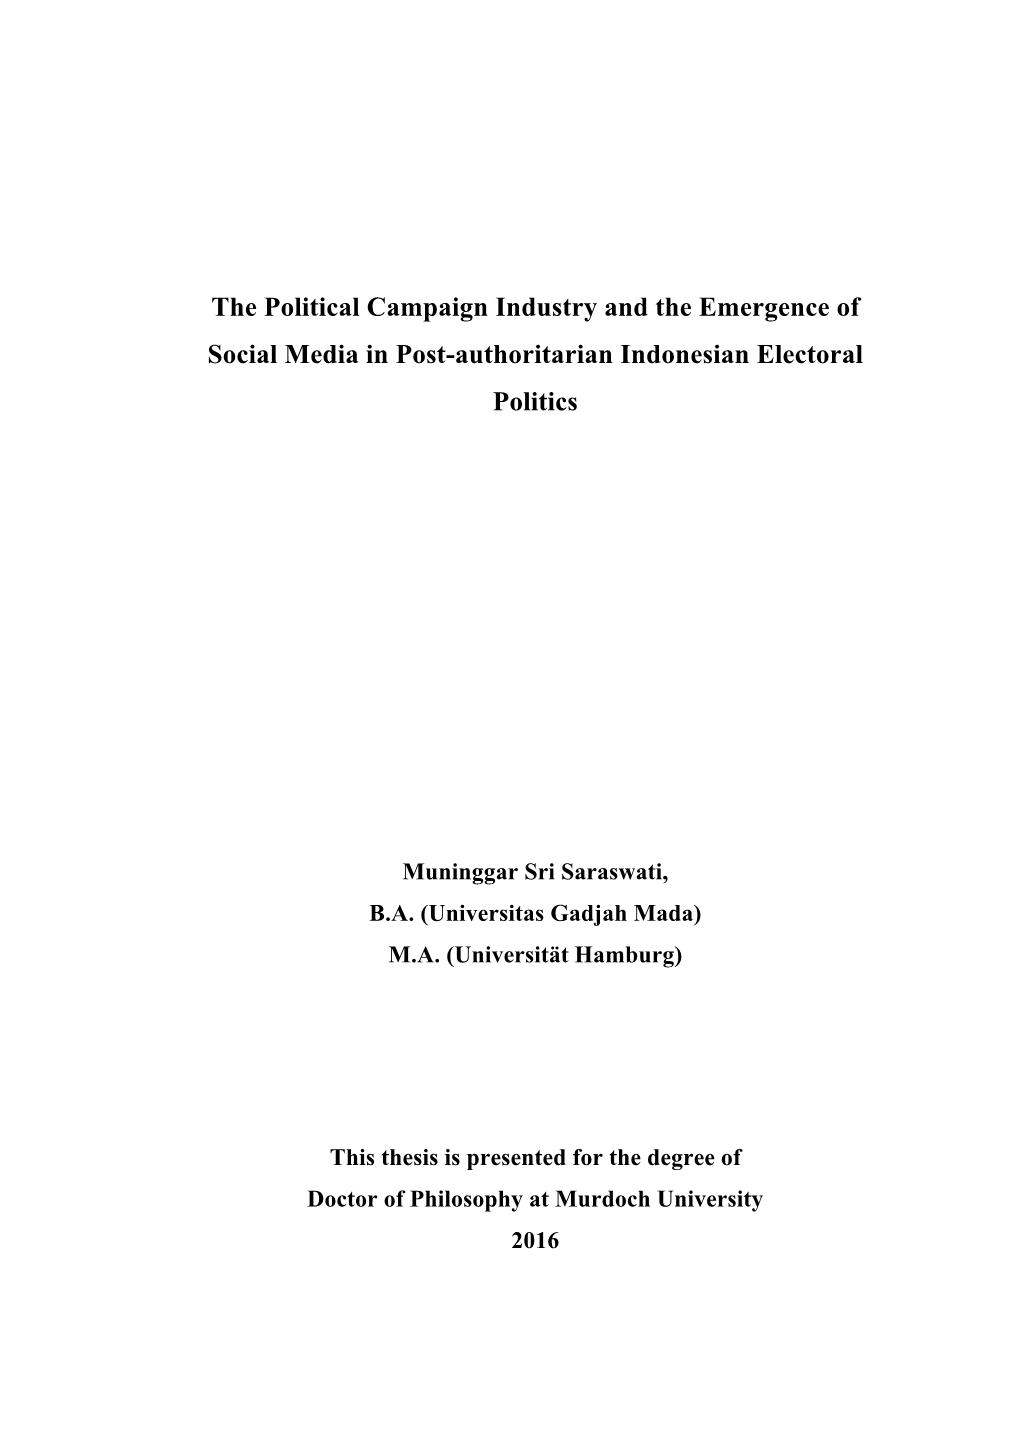 The Political Campaign Industry and the Emergence of Social Media in Post-Authoritarian Indonesian Electoral Politics